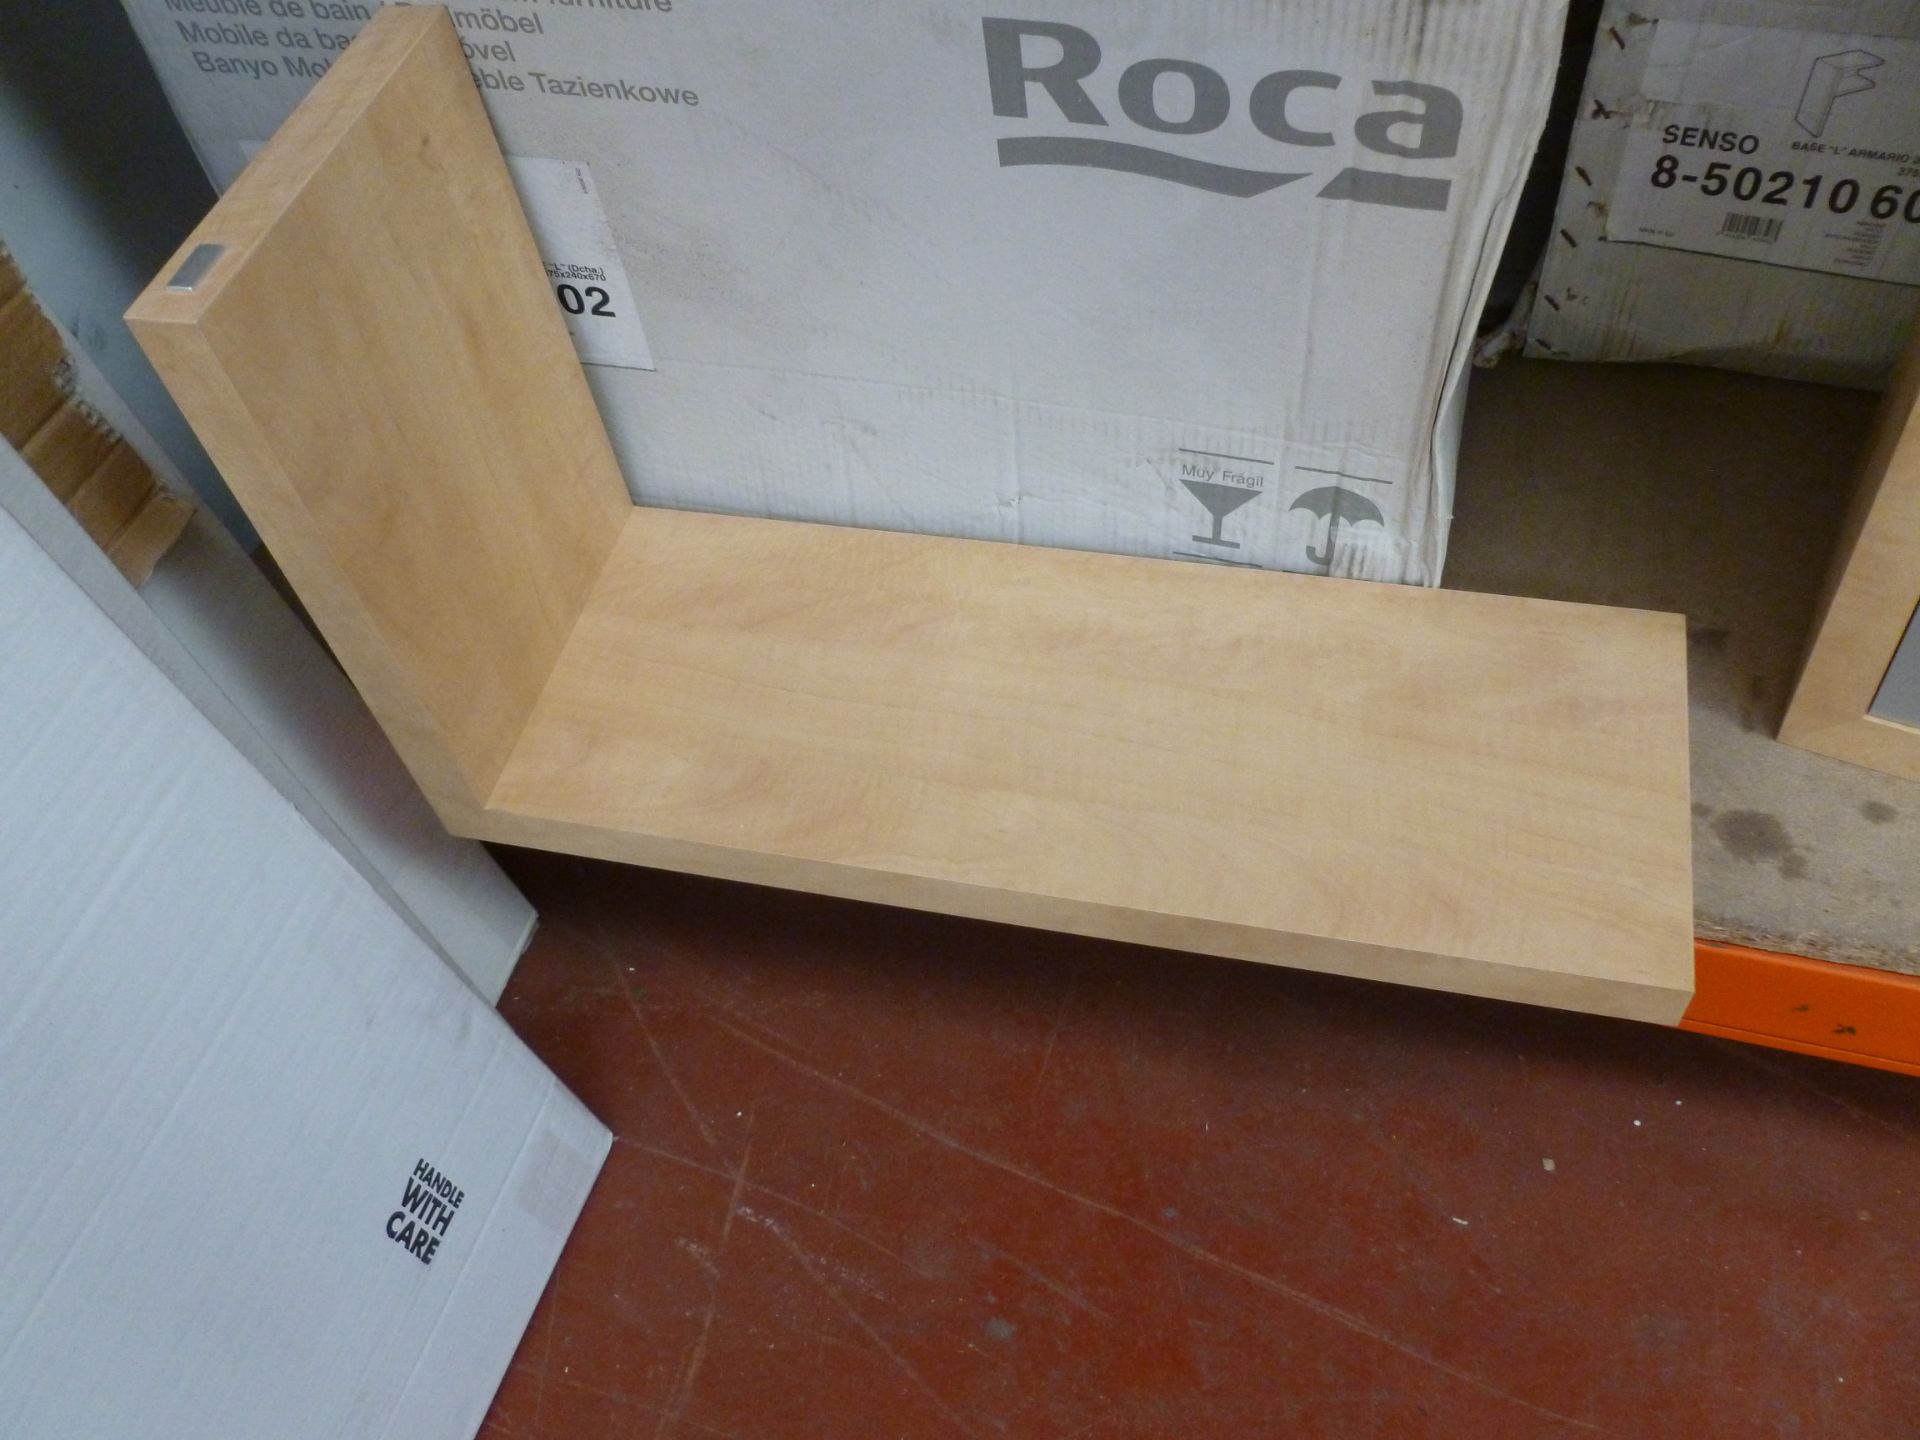 Roca Senso L shaped shelf in Apple wood, new and boxed